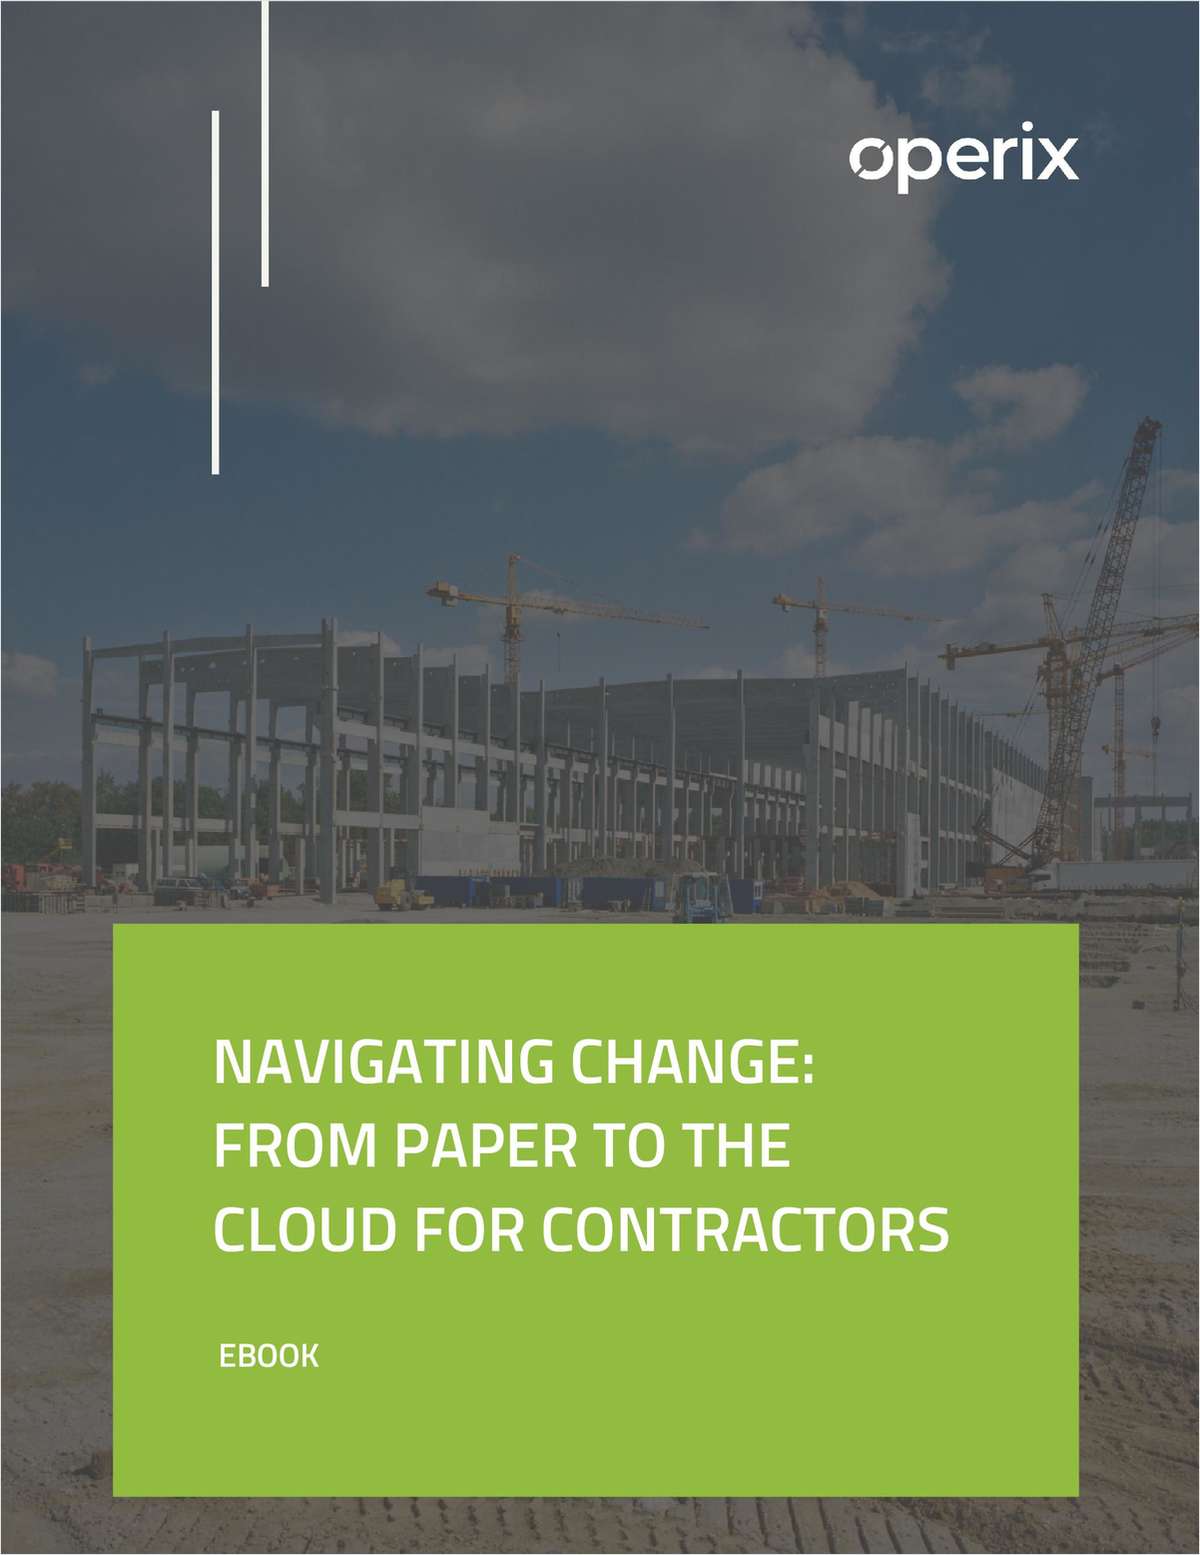 NAVIGATING CHANGE: FROM PAPER TO THE CLOUD FOR CONTRACTORS